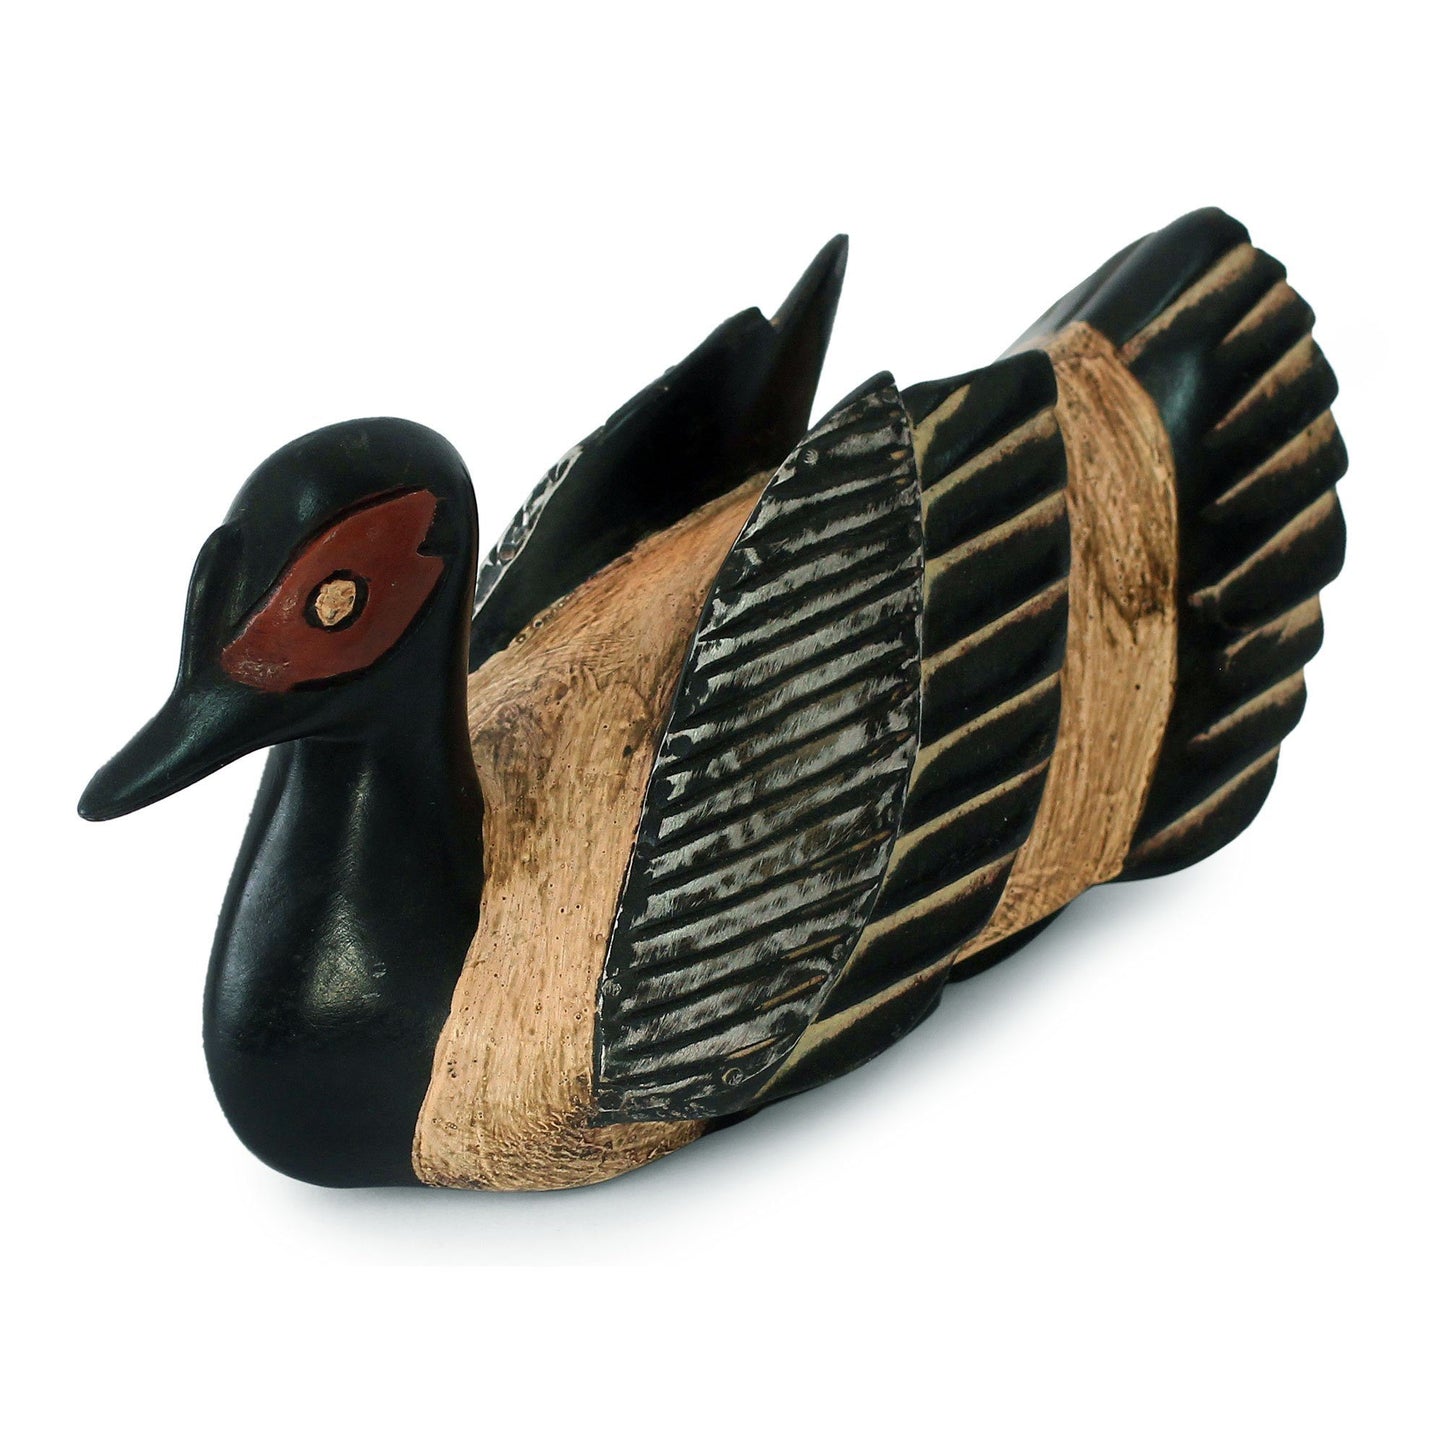 Handcrafted Sese Wood Duck Sculpture